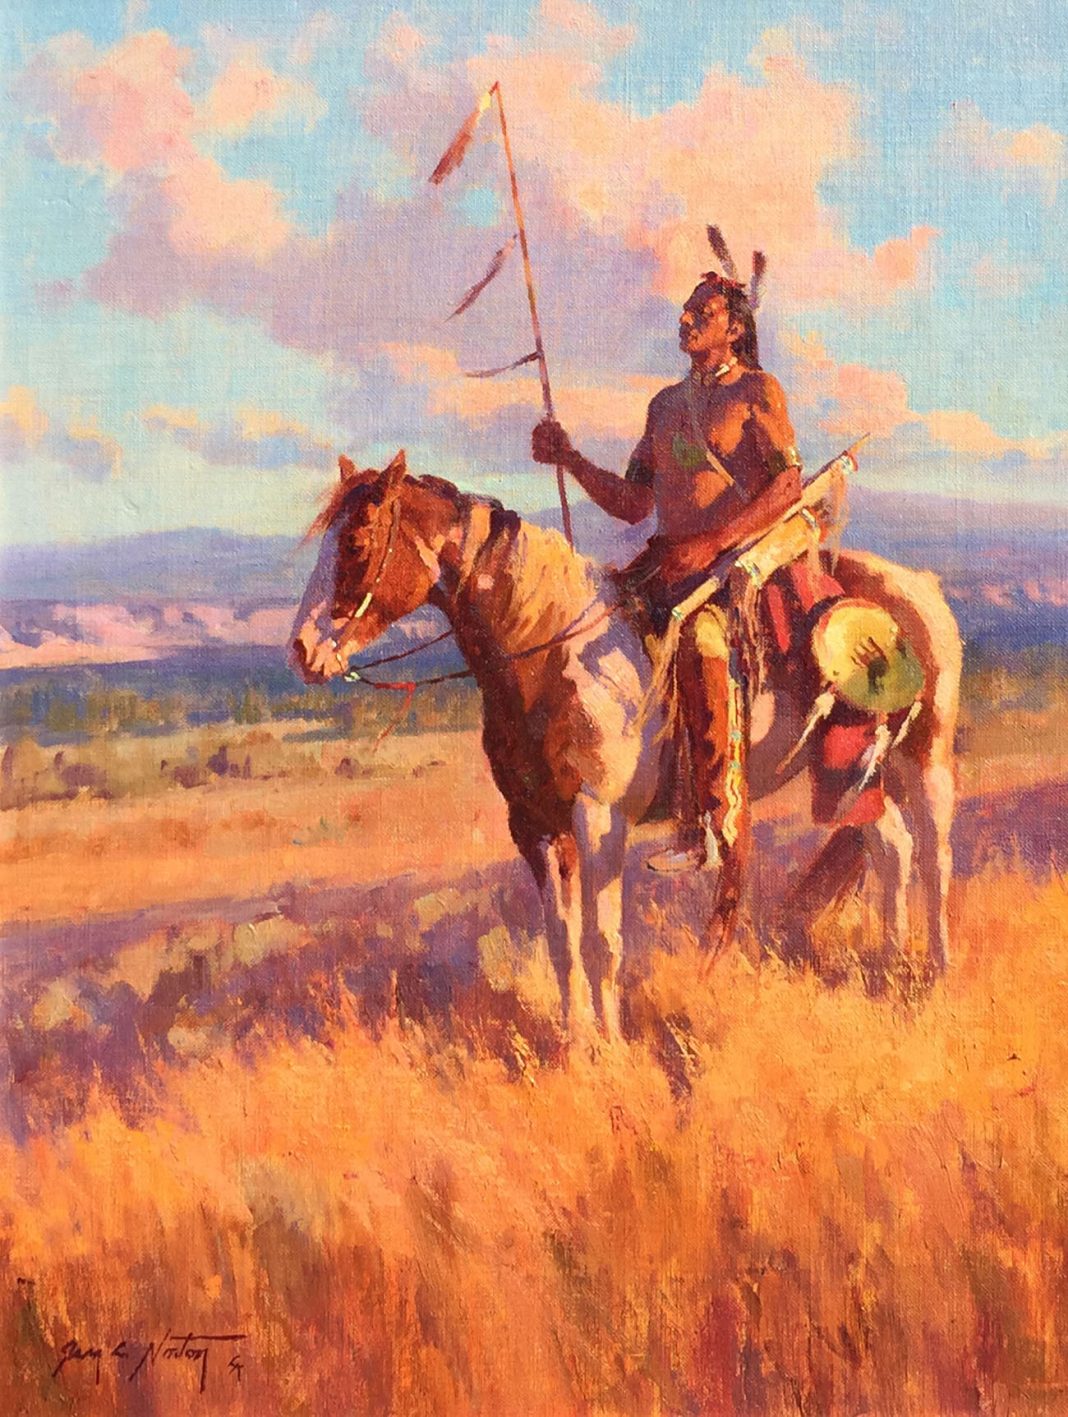 Jim Norton Sunset On A Proud People Native American Horse plains western oil landscape painting clouds